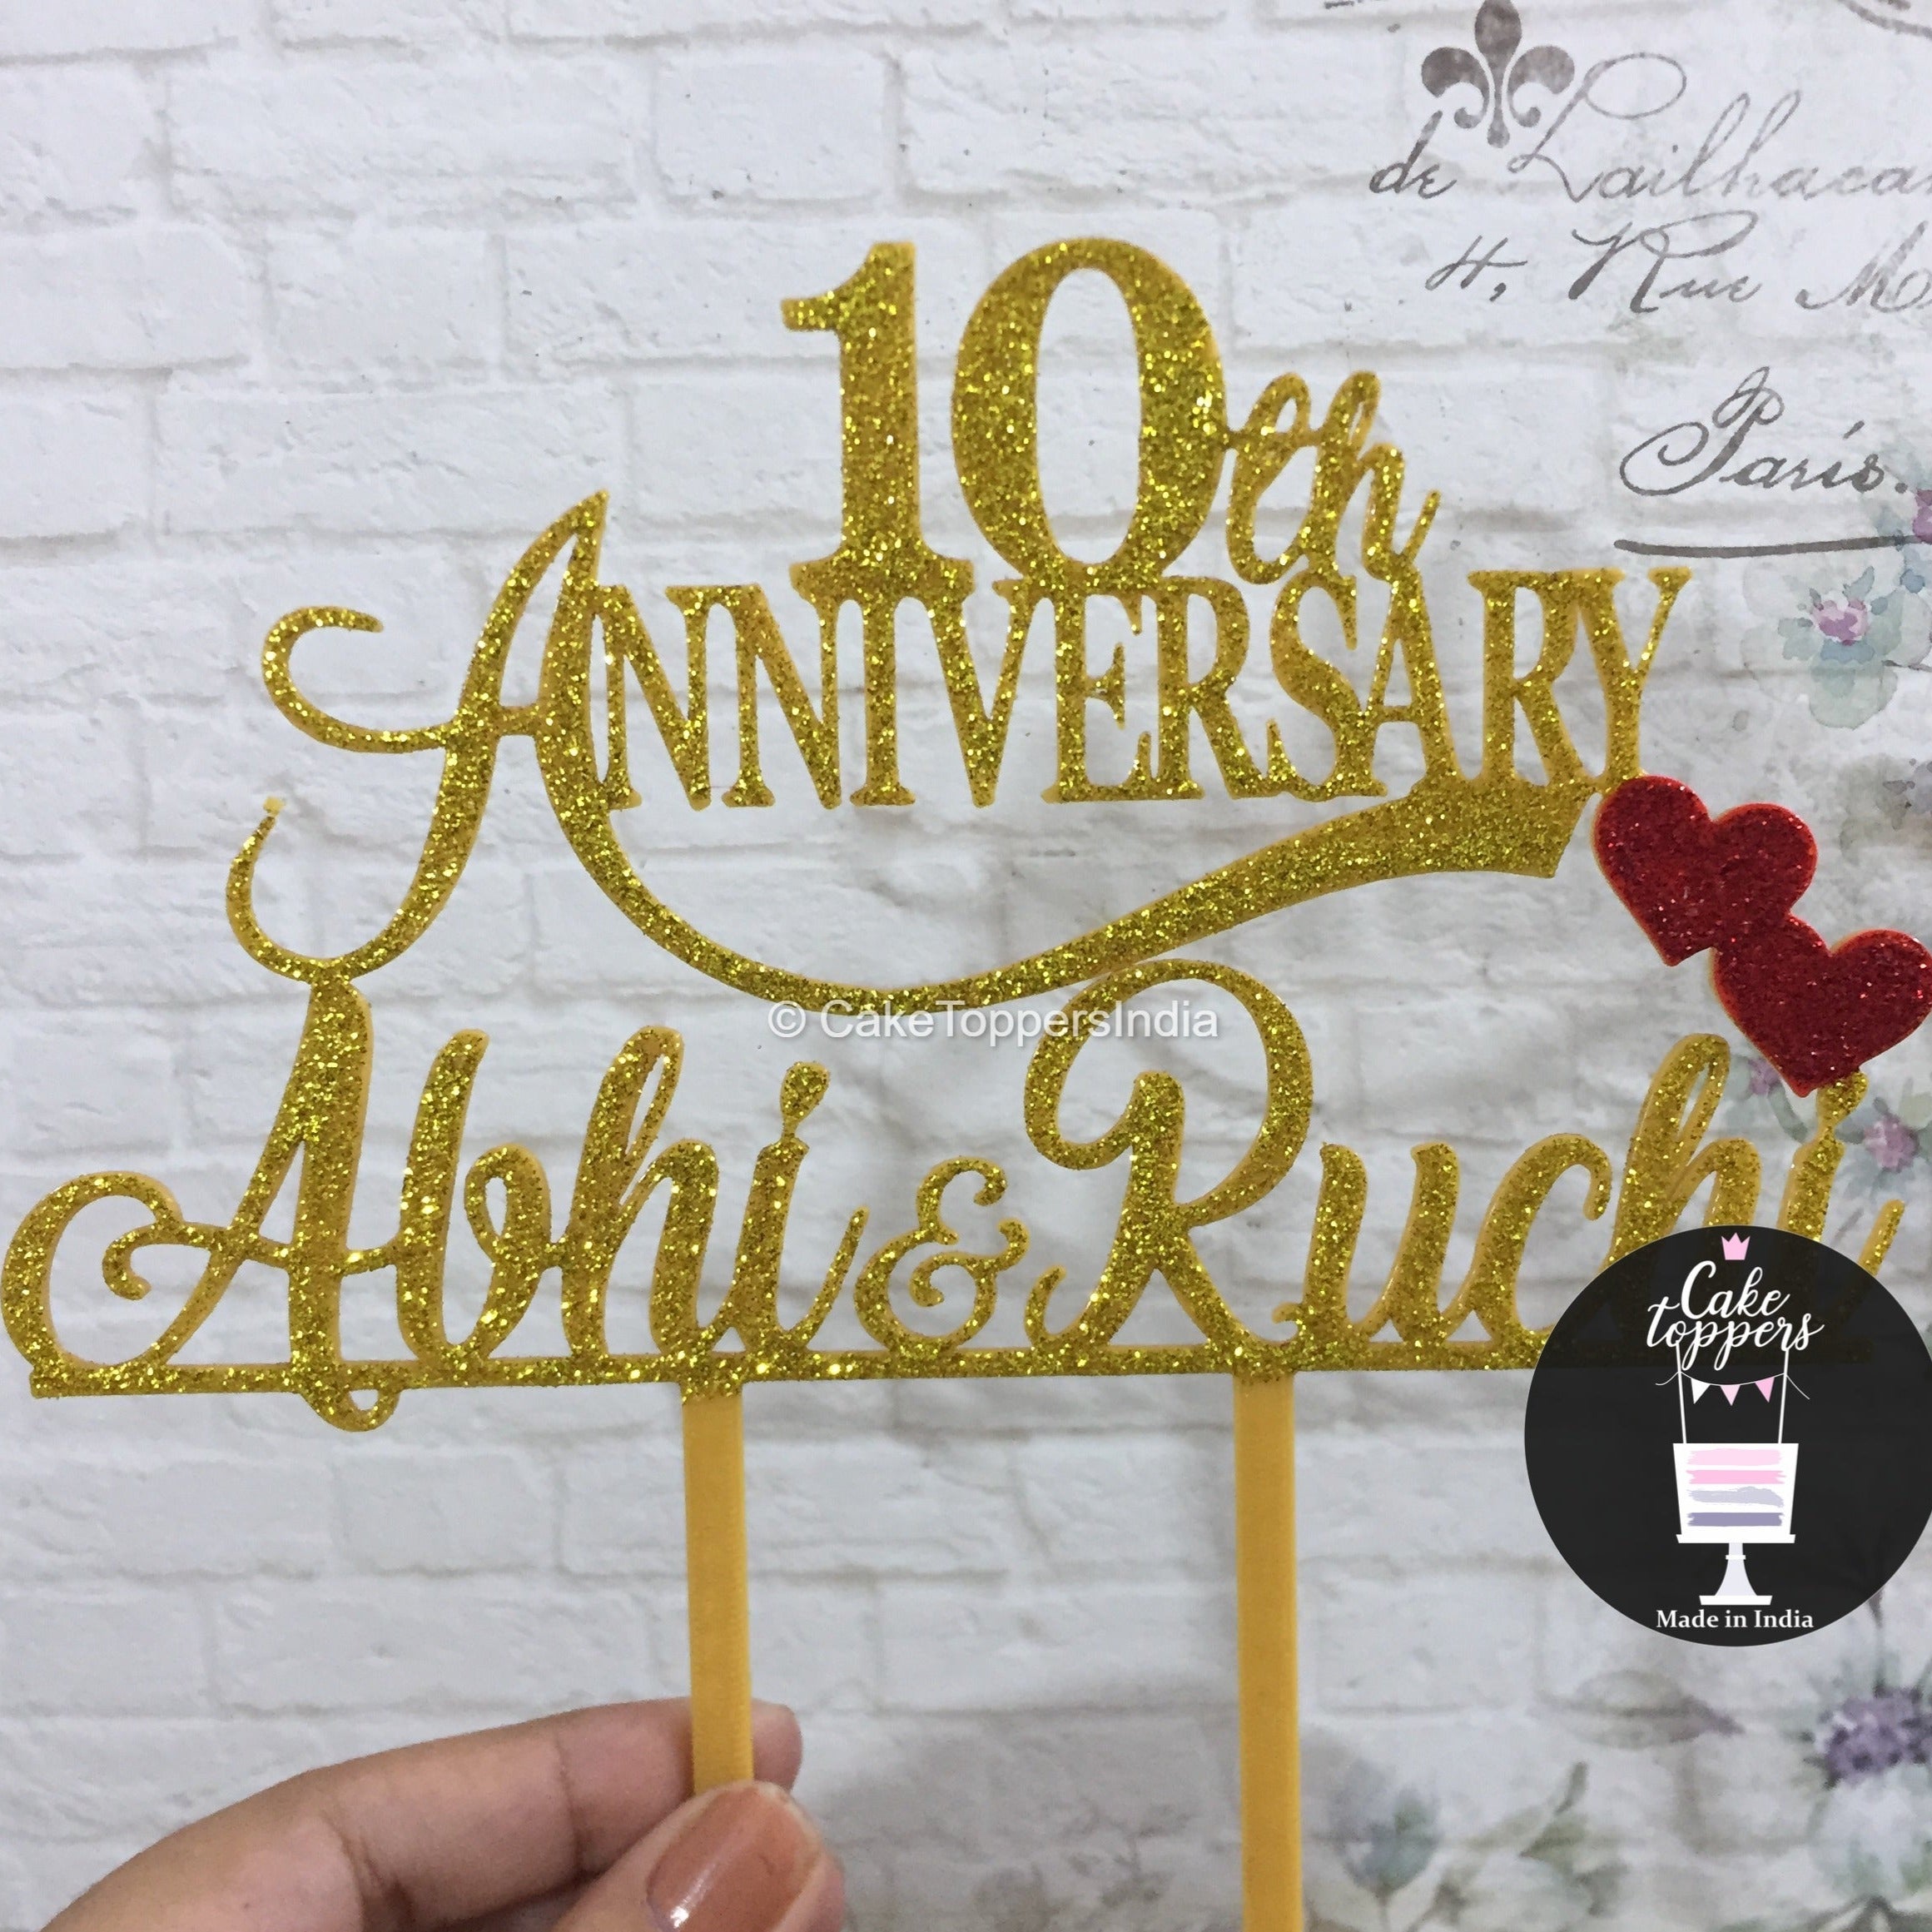 ZYOZI Rose Gold Glitter 10th Anniversary Cake Topper Celebration Party -  Pack of 5 (10TH ANNIVERSARY) Cake Topper Price in India - Buy ZYOZI Rose  Gold Glitter 10th Anniversary Cake Topper Celebration